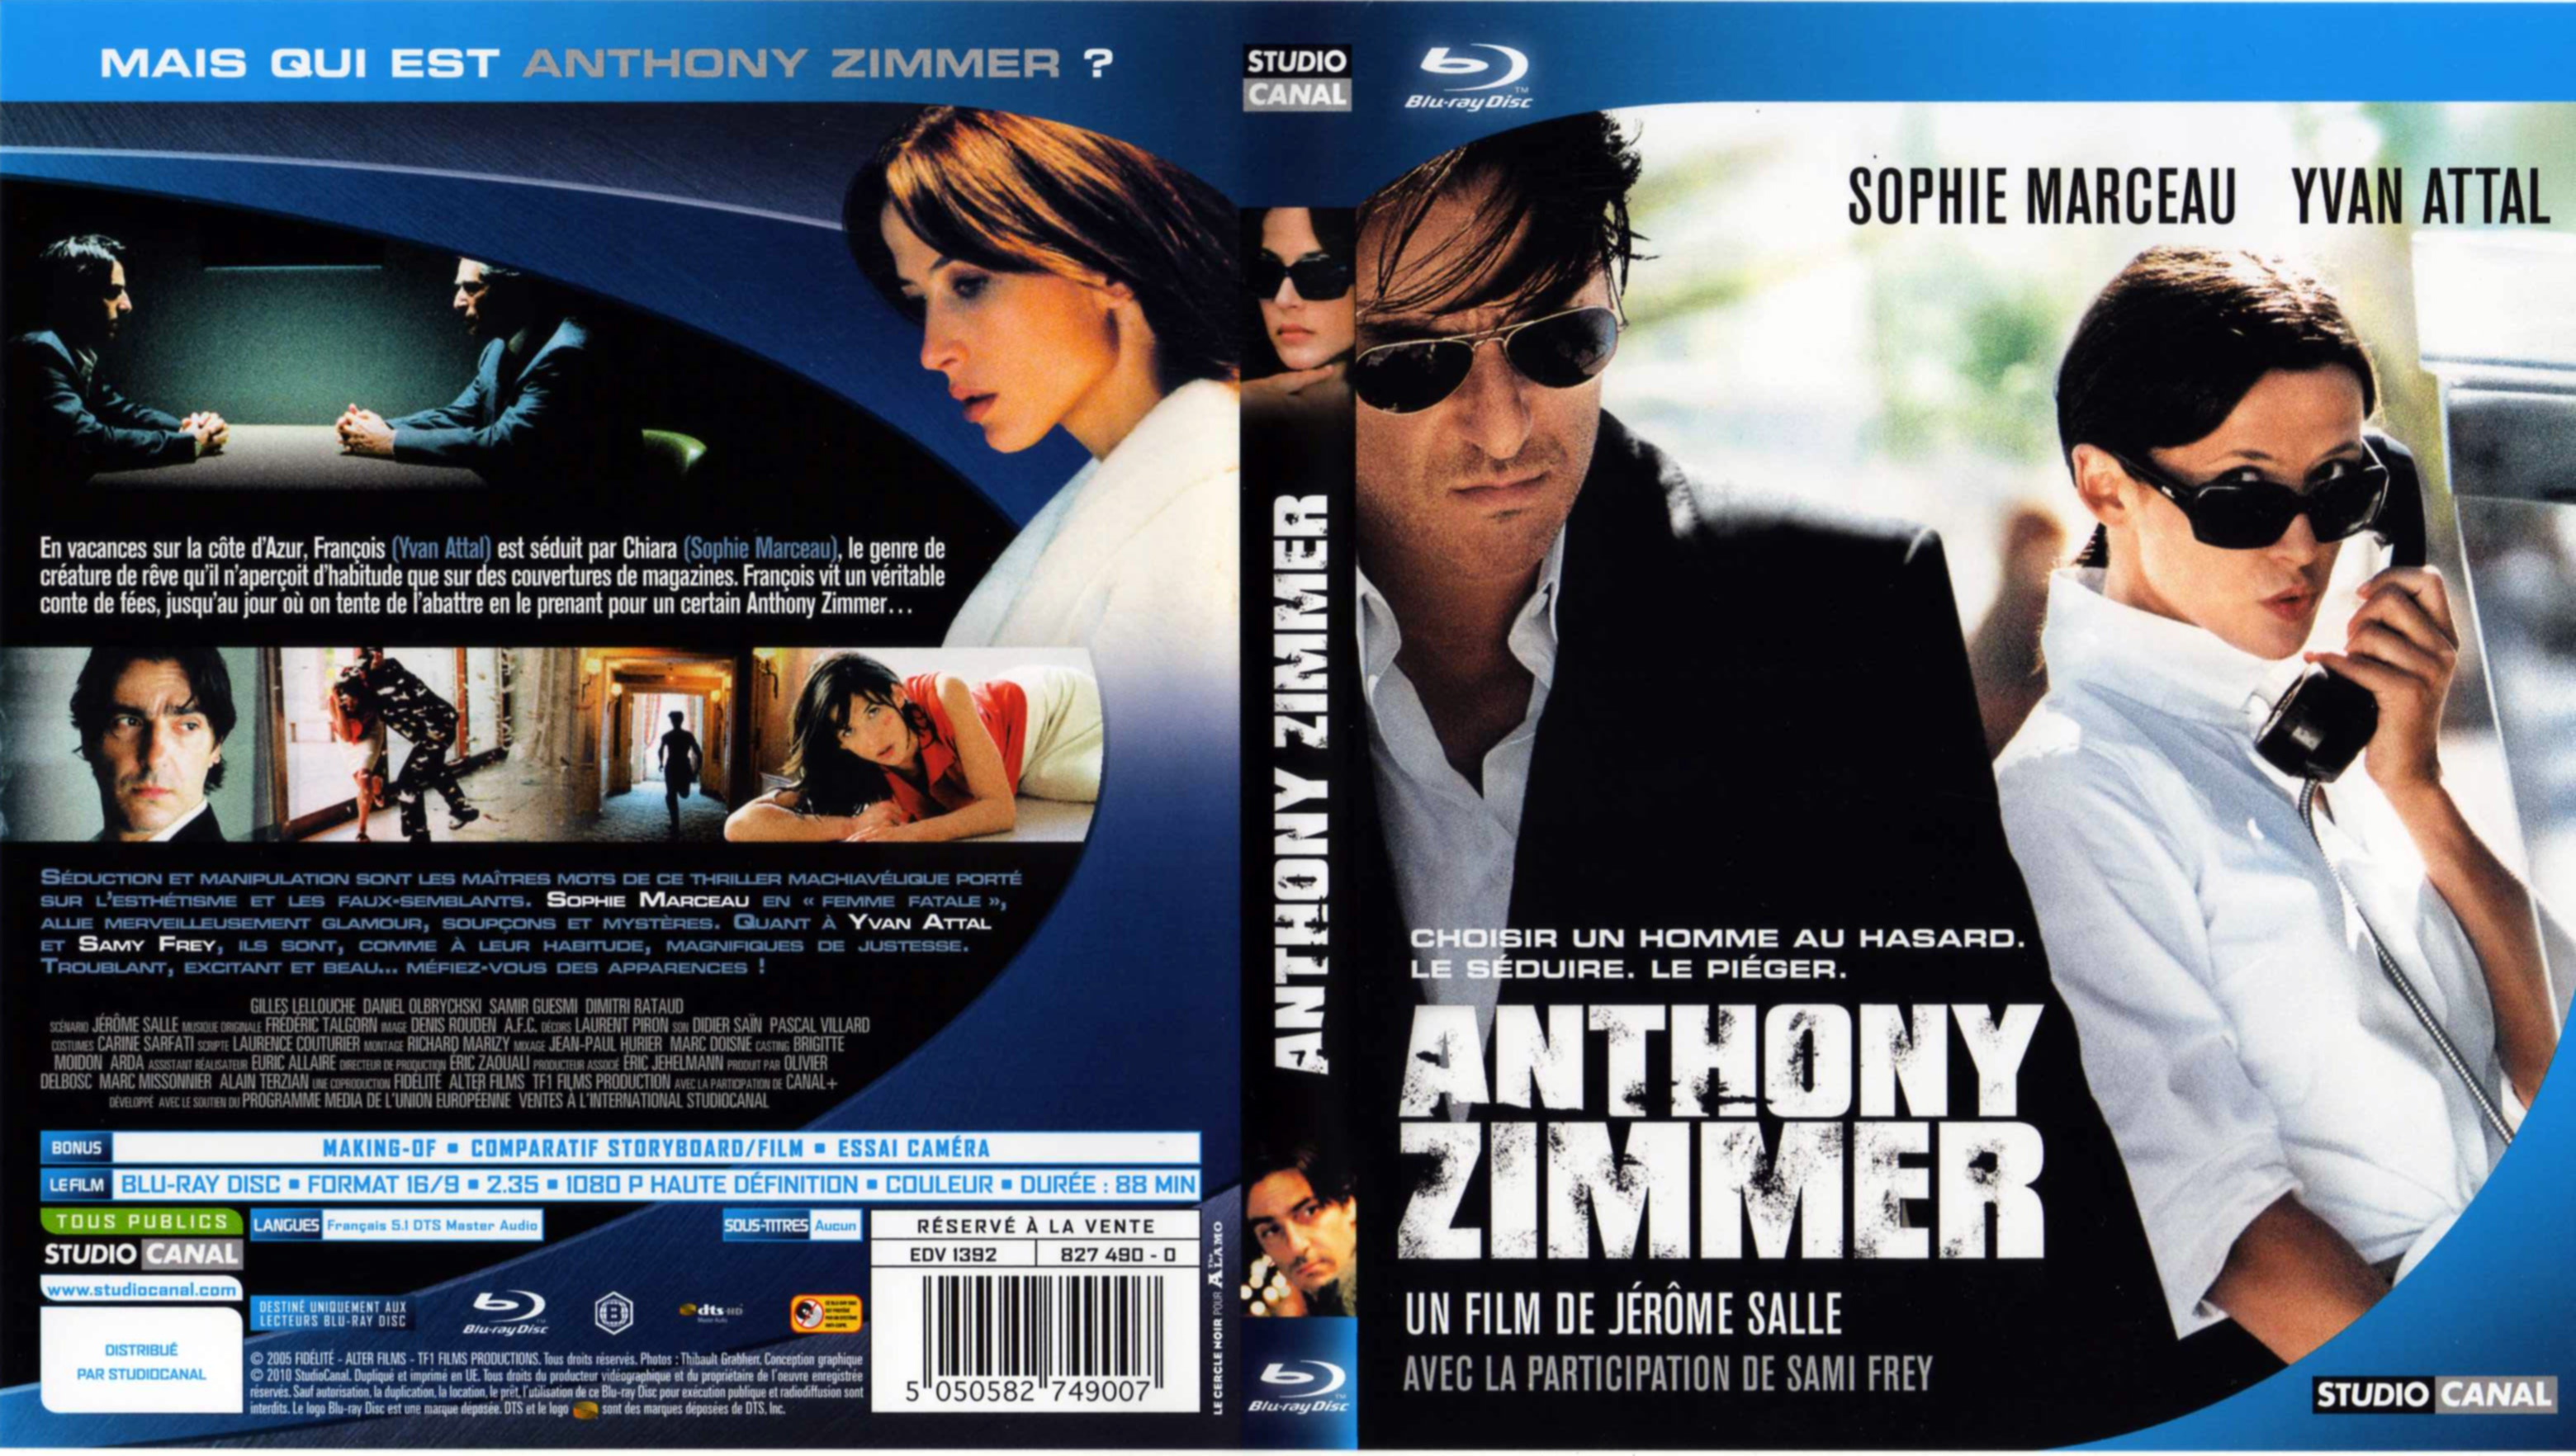 Jaquette DVD Anthony Zimmer (BLU-RAY)